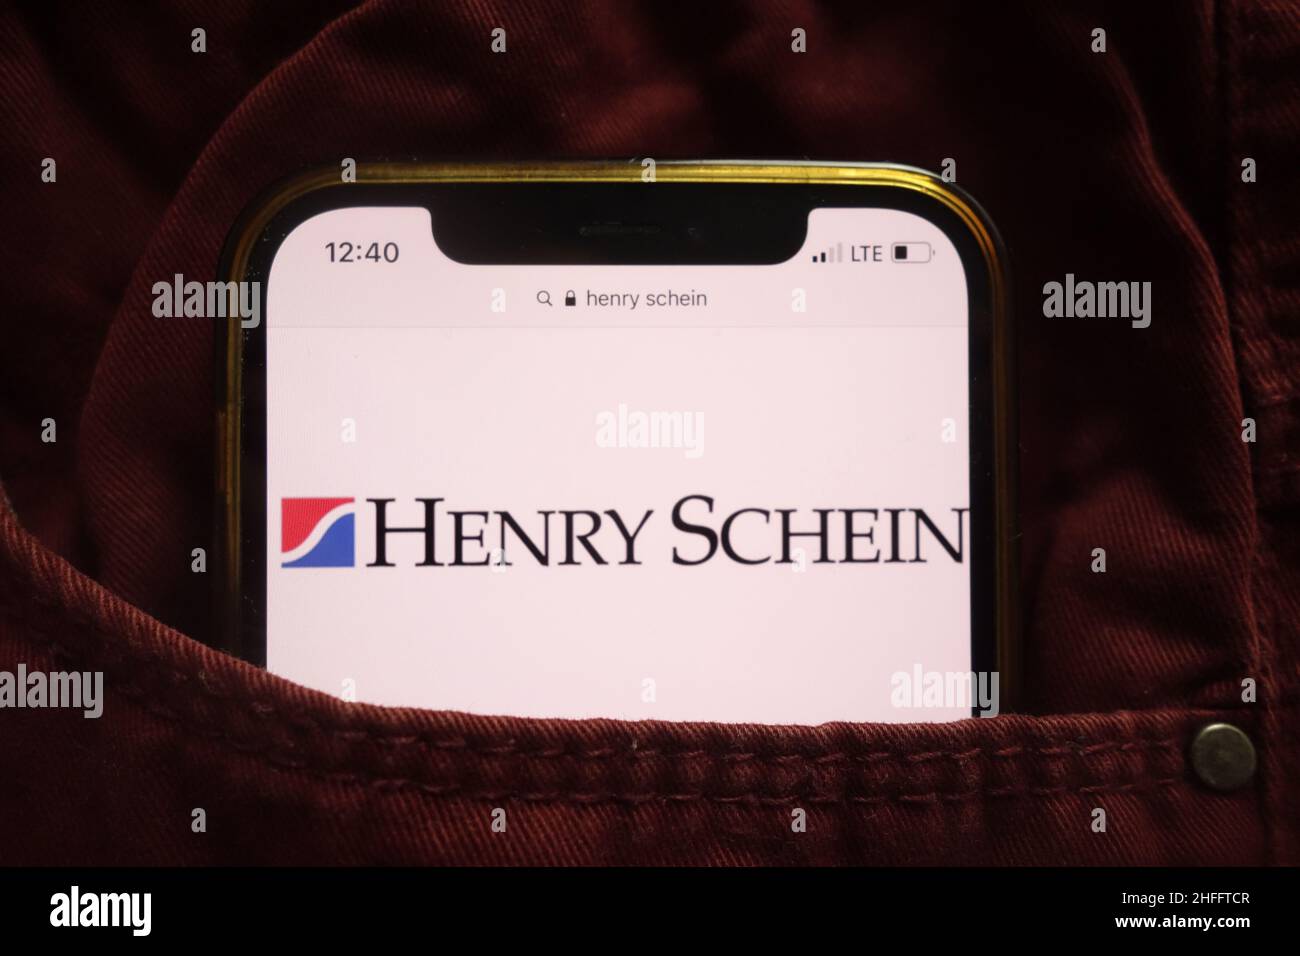 KONSKIE, POLAND - January 15, 2022: Henry Schein Inc logo displayed on mobile phone hidden in jeans pocket Stock Photo